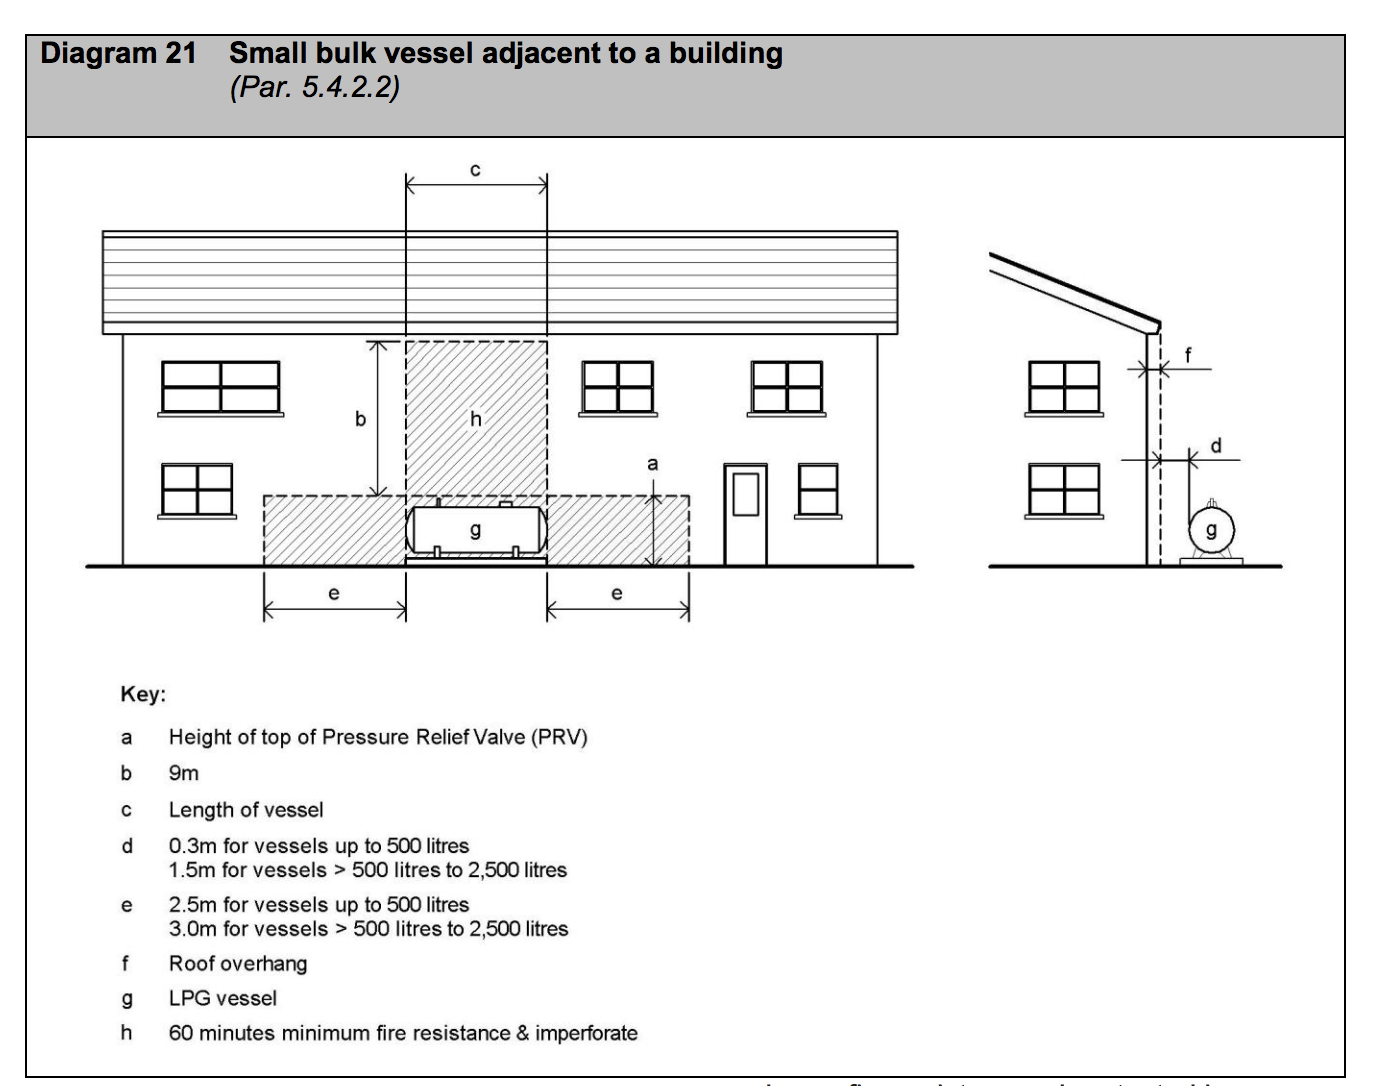 Diagram HJ21 - Small bulk vessel adjacent to a building - Extract from TGD J